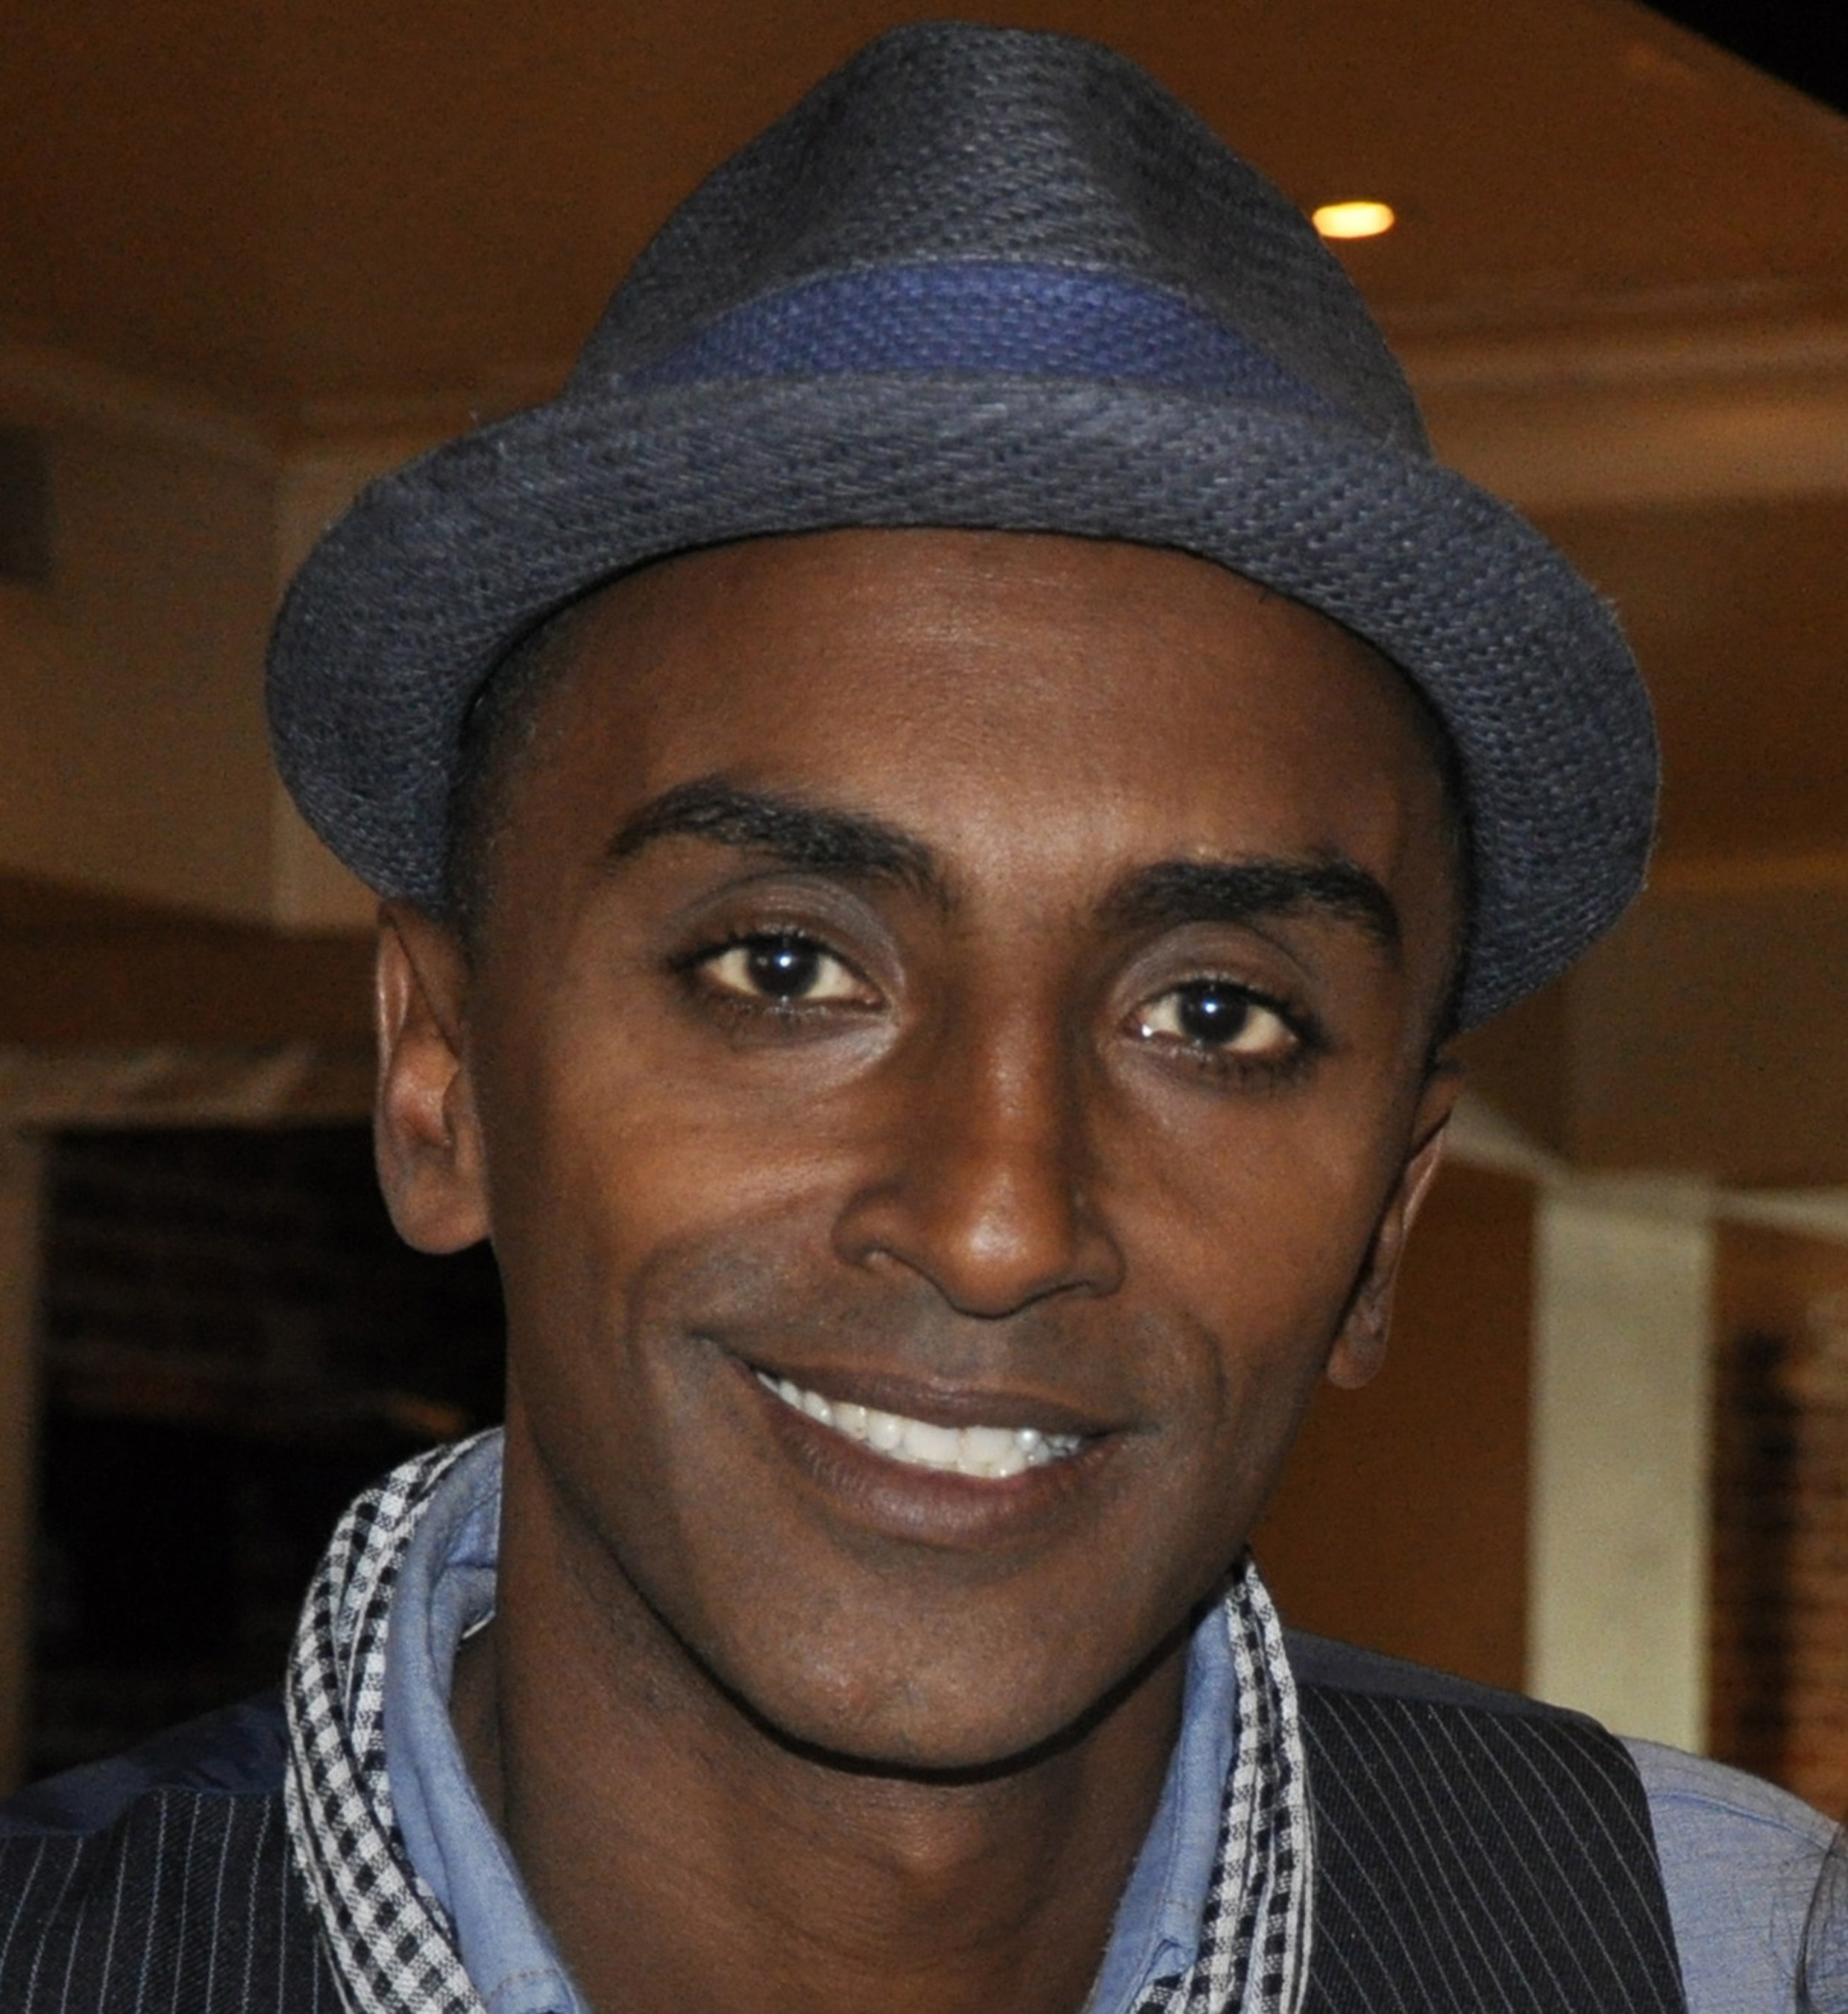 Celebrity Chef Marcus Samuelsson of Red Rooster Harlem in New York City, NY, will provide the opening keynote presentation for the Catersource and Event Solutions Conference & Tradeshow at Caesars Palace in Las Vegas on Sunday, March 8 at 4:45pm.